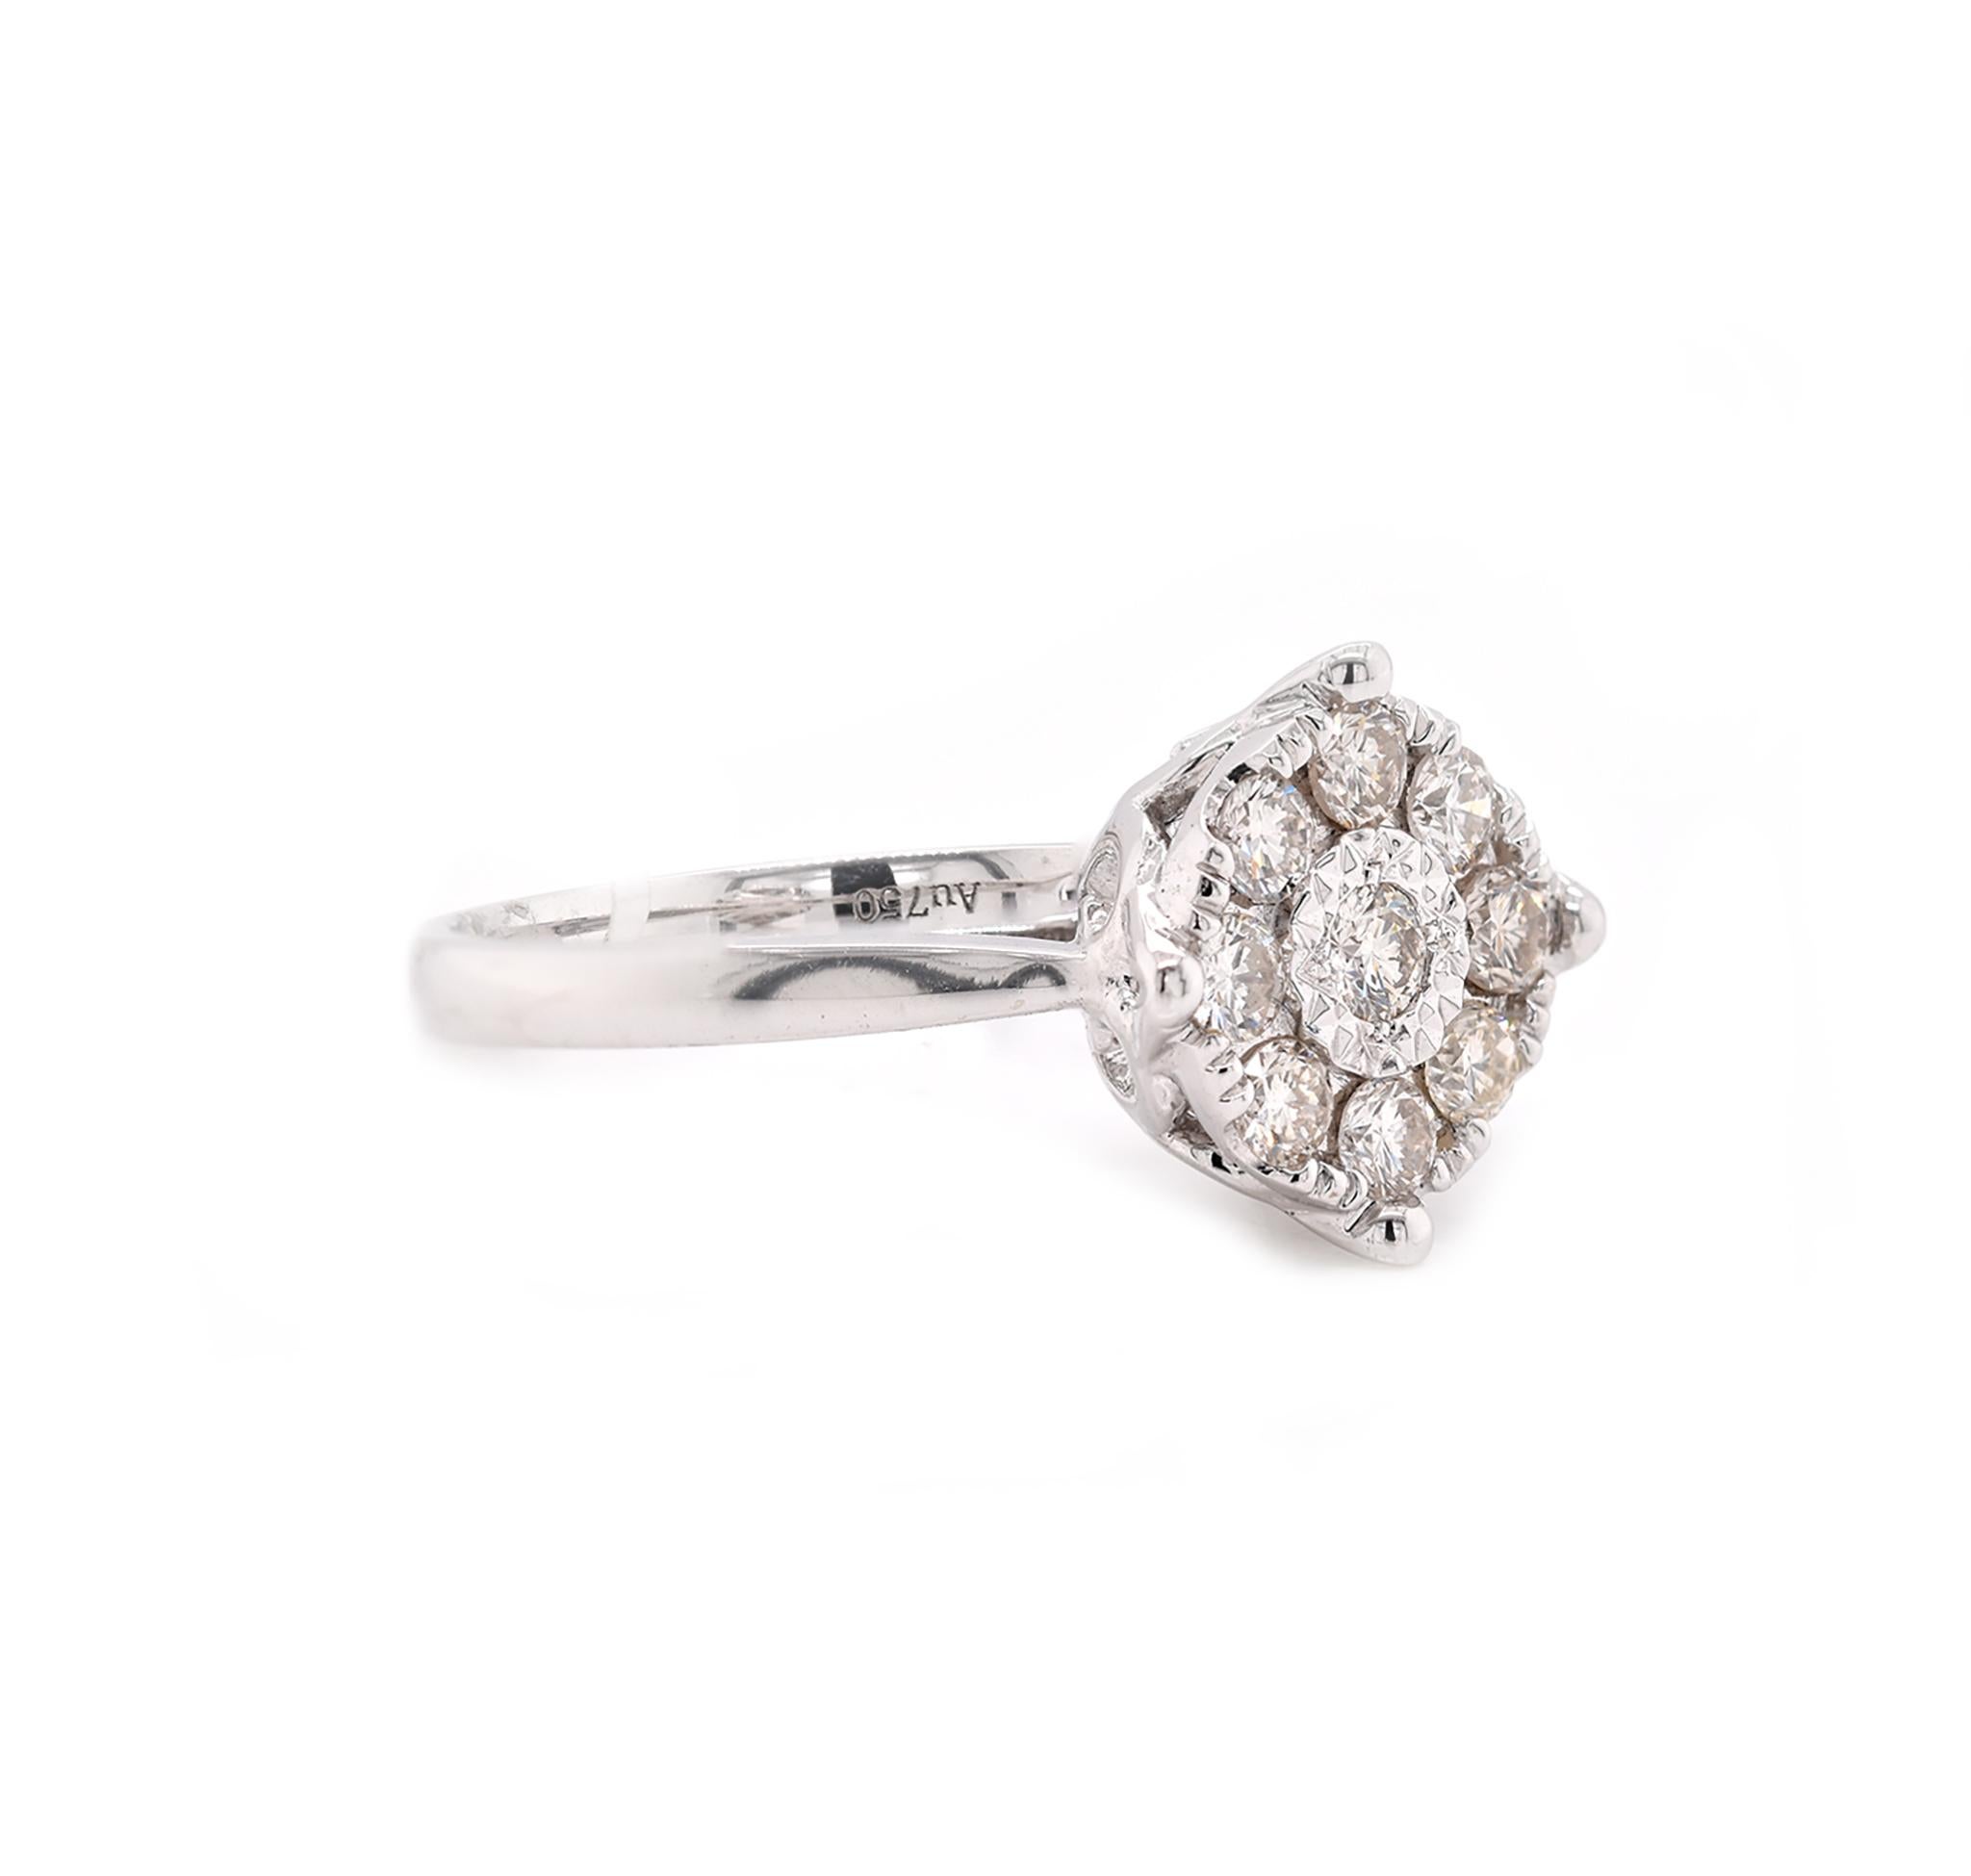 Designer: Custom
Material: 18k white gold
Diamonds: 9 round cut = .63cttw
Color: G
Clarity: VS
Size: 7
Dimensions: ring measures 12.25mm wide
Weight: 4.28 grams
